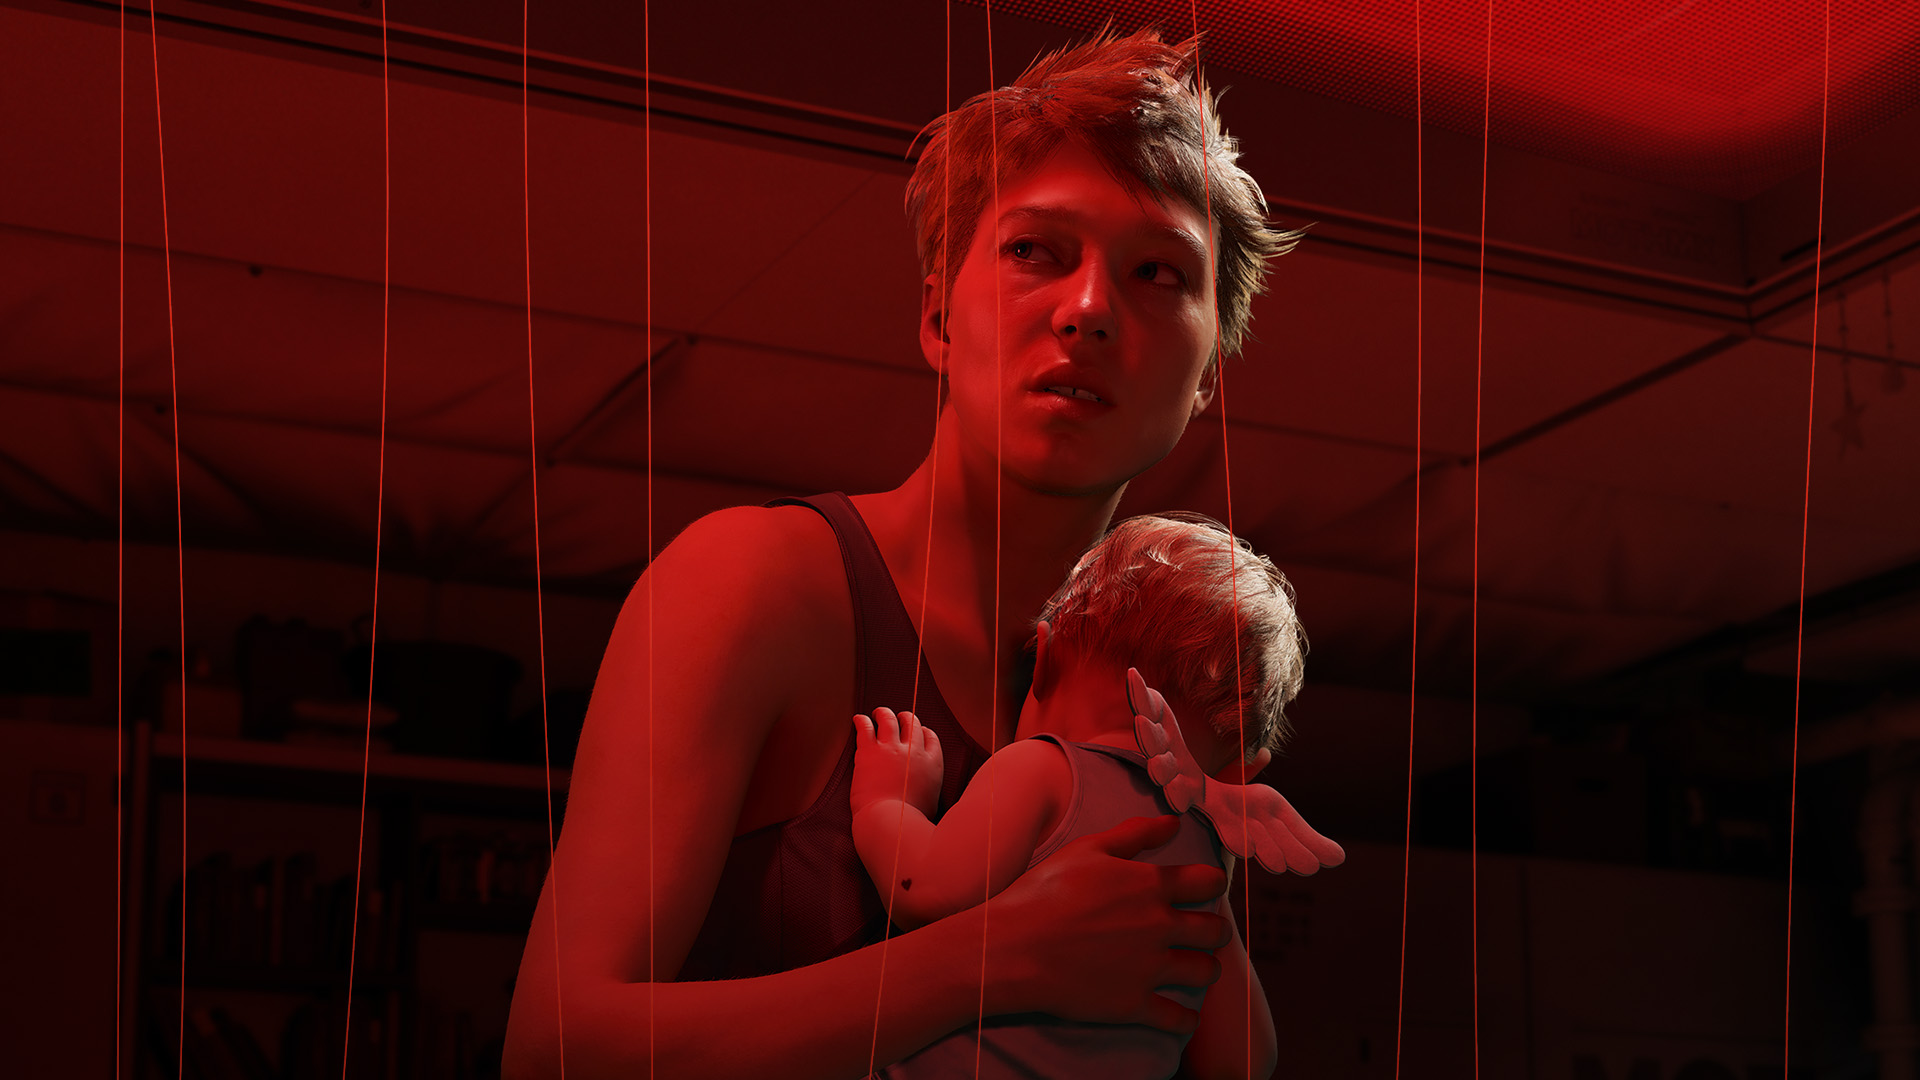 Fragile, portrayed by Lea Seydoux, holds her baby, who is wearing wings, in a panicked state in a screenshot from Death Stranding 2